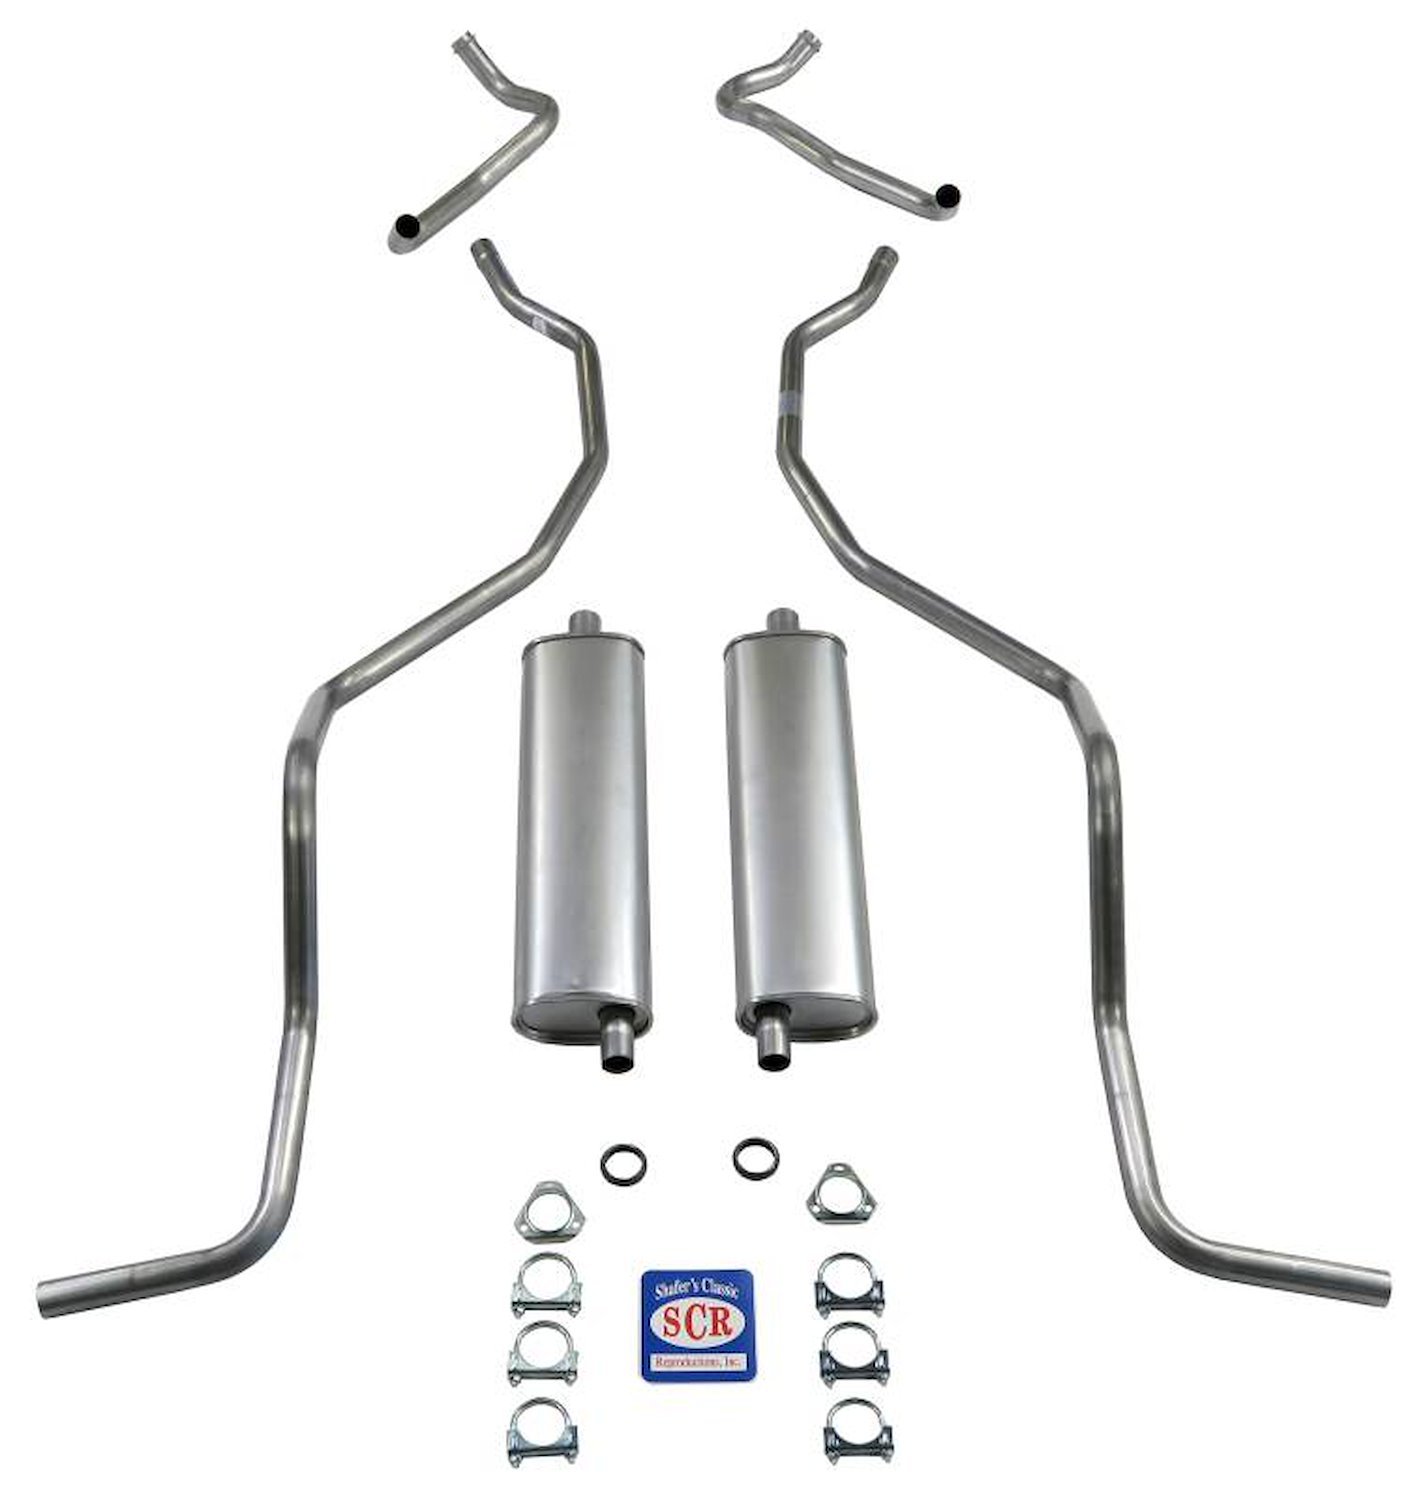 73033S 1960-1964 Chevrolet 8-cyl 283 & 327 Dual Exhaust & ONLY 1960 El Camino Exhaust System, 304 Stainless Steel